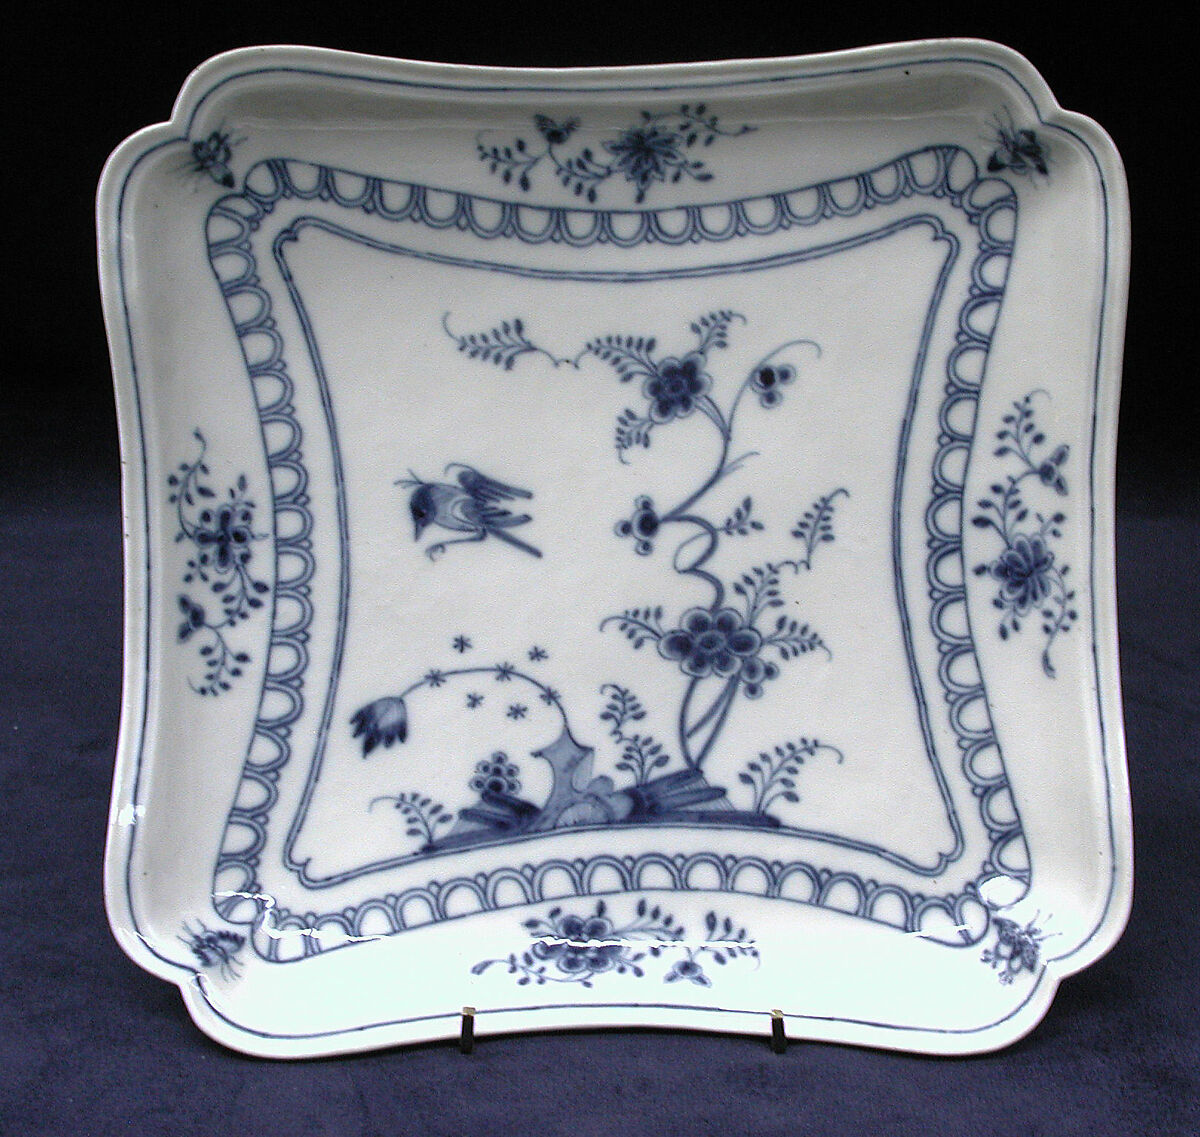 Square dish, Ansbach Pottery and Porcelain Manufactory (German, 1758–1860), Hard-paste porcelain, German, Ansbach 